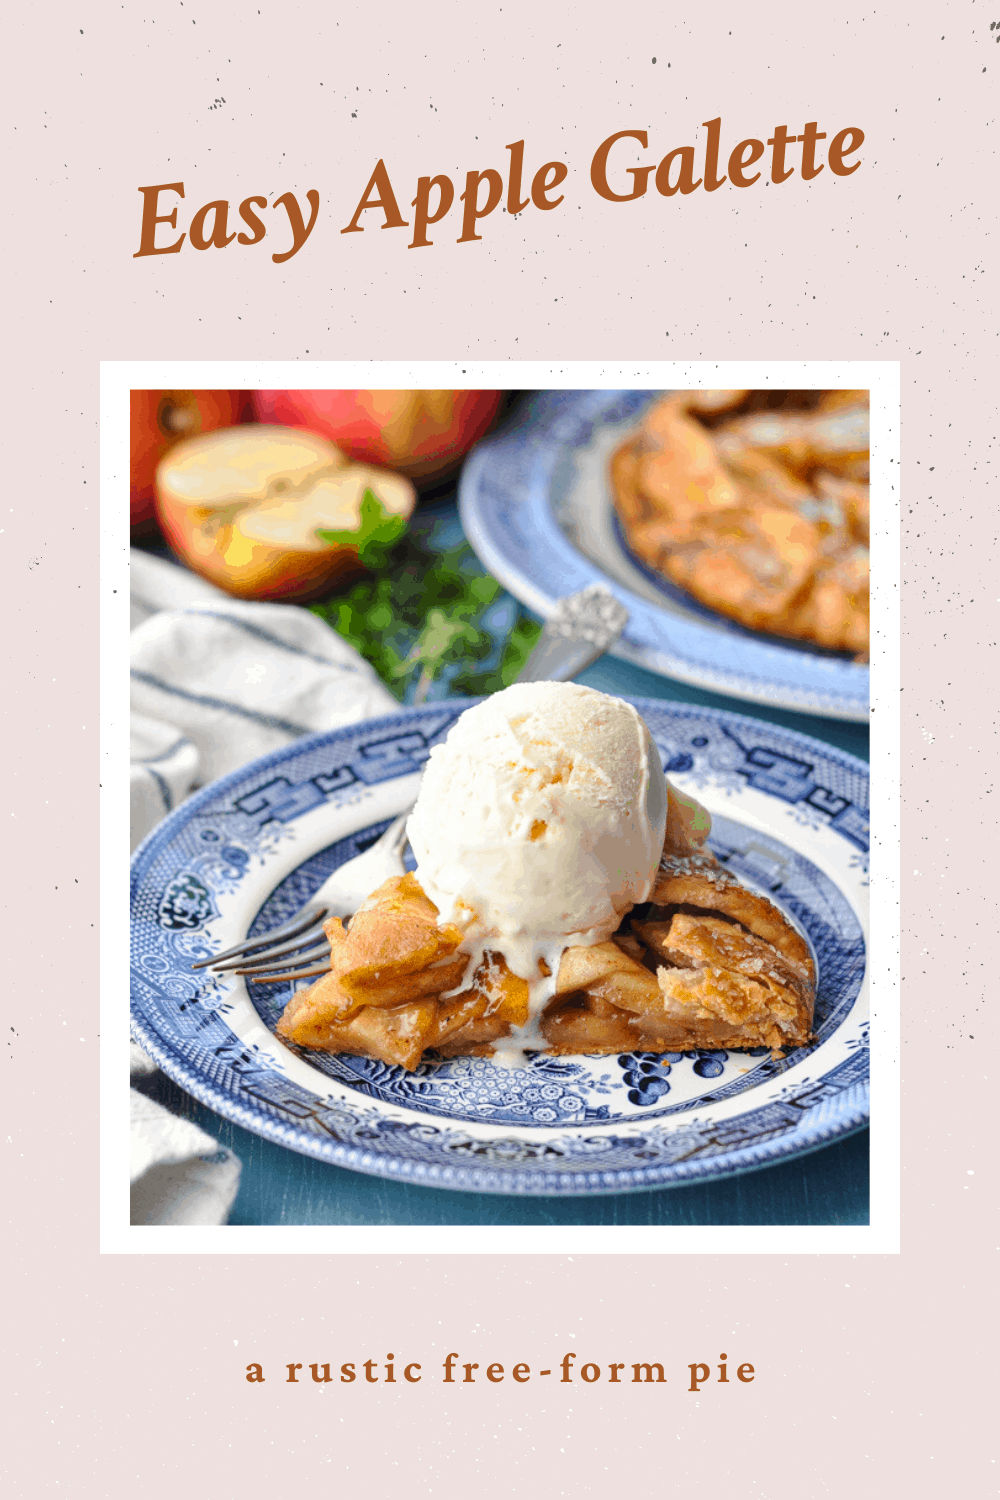 Framed image of a slice of apple galette with ice cream and text on border